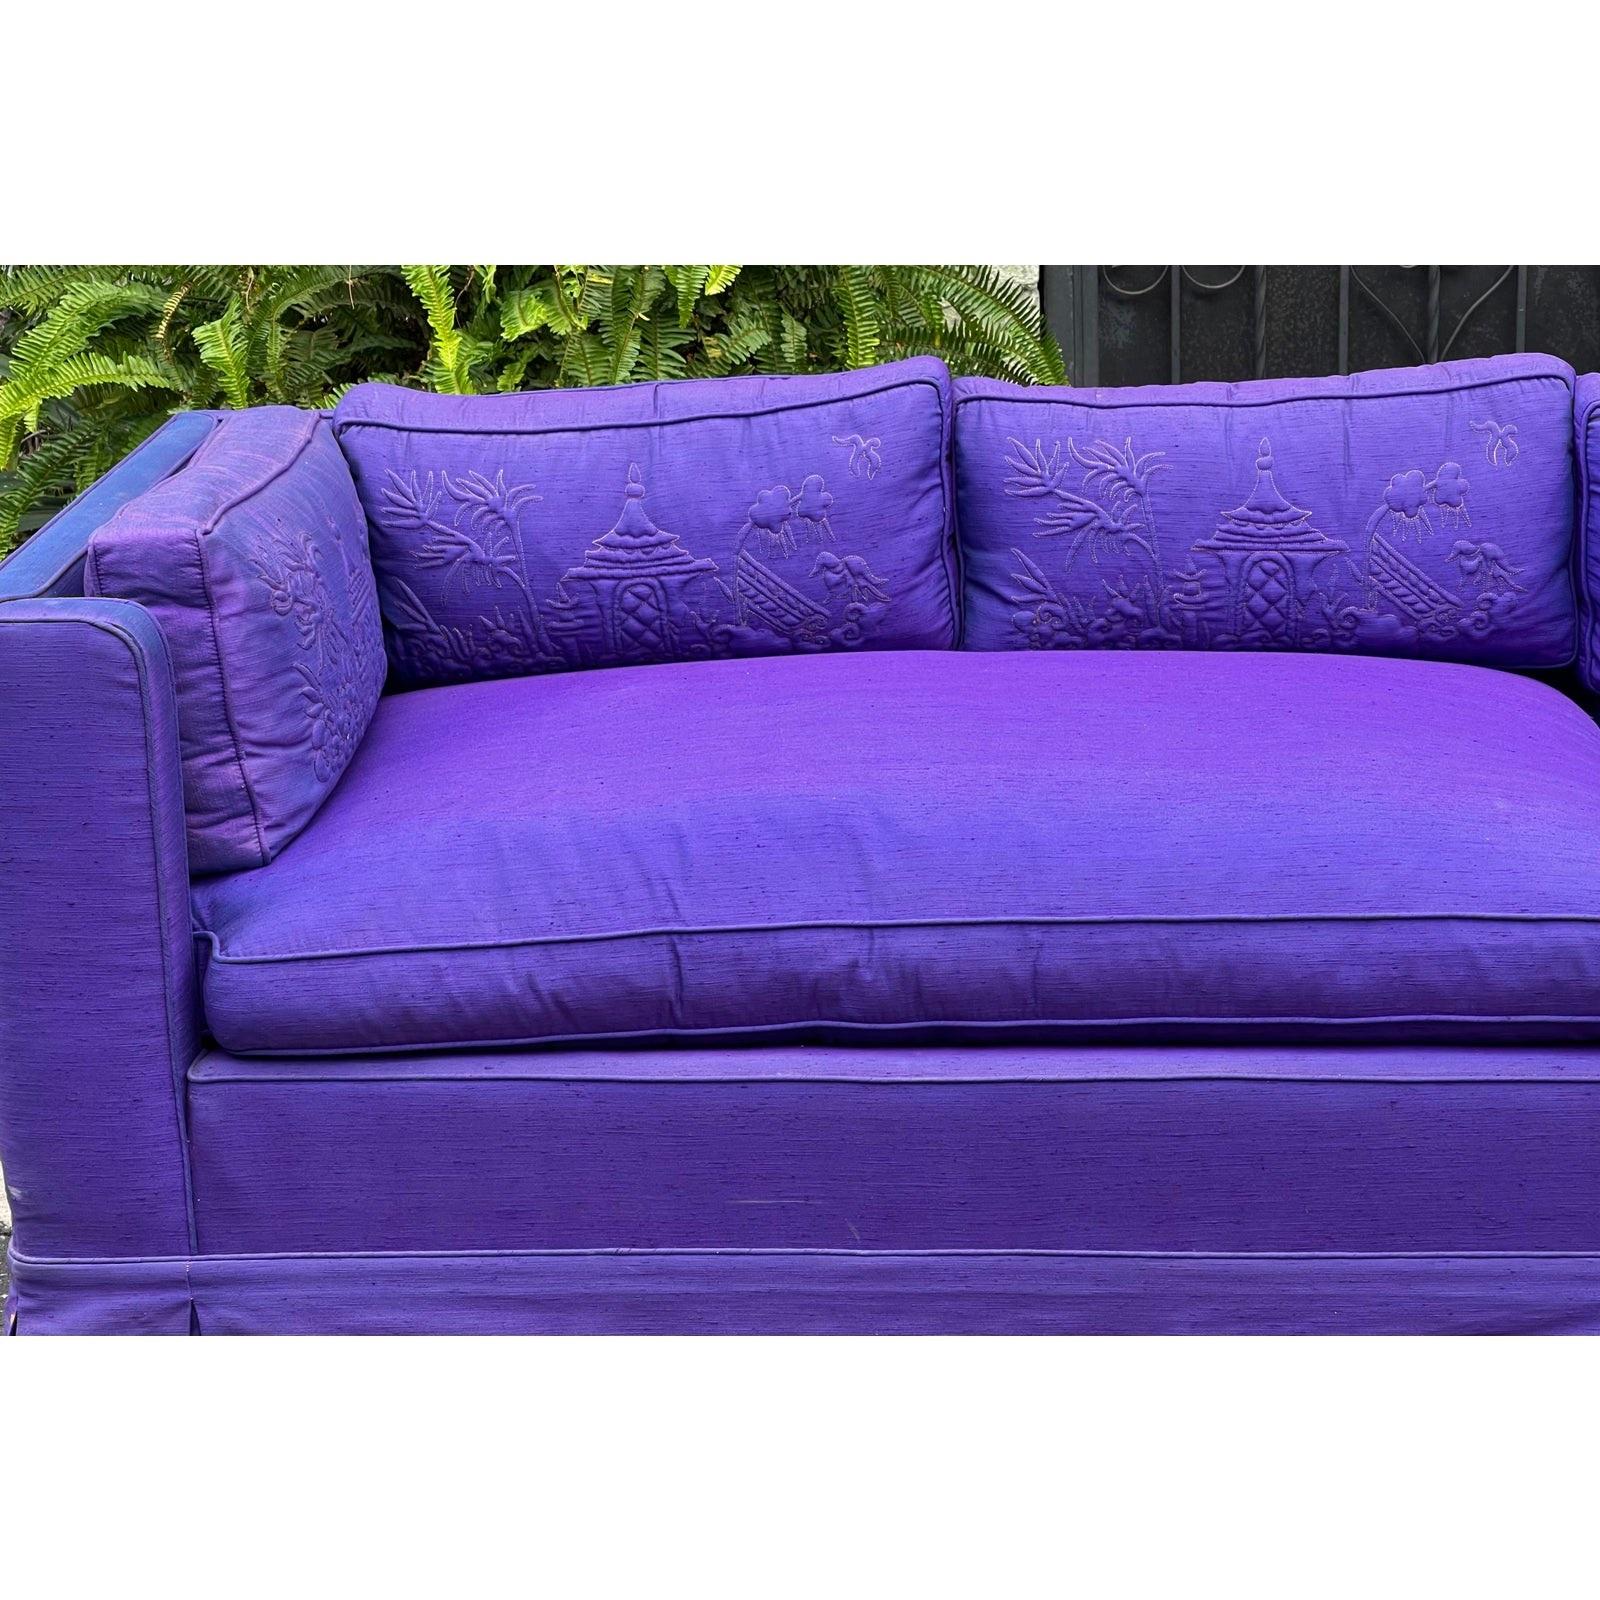 Grosfeld House Hollywood Regency Mid-Century Modern 9' long low sofa. The color is an alexandrite purple with hues of blue in certain light. Features Chinese embroidered cushion with luxurious down fill. No holes or stains. Light fading.